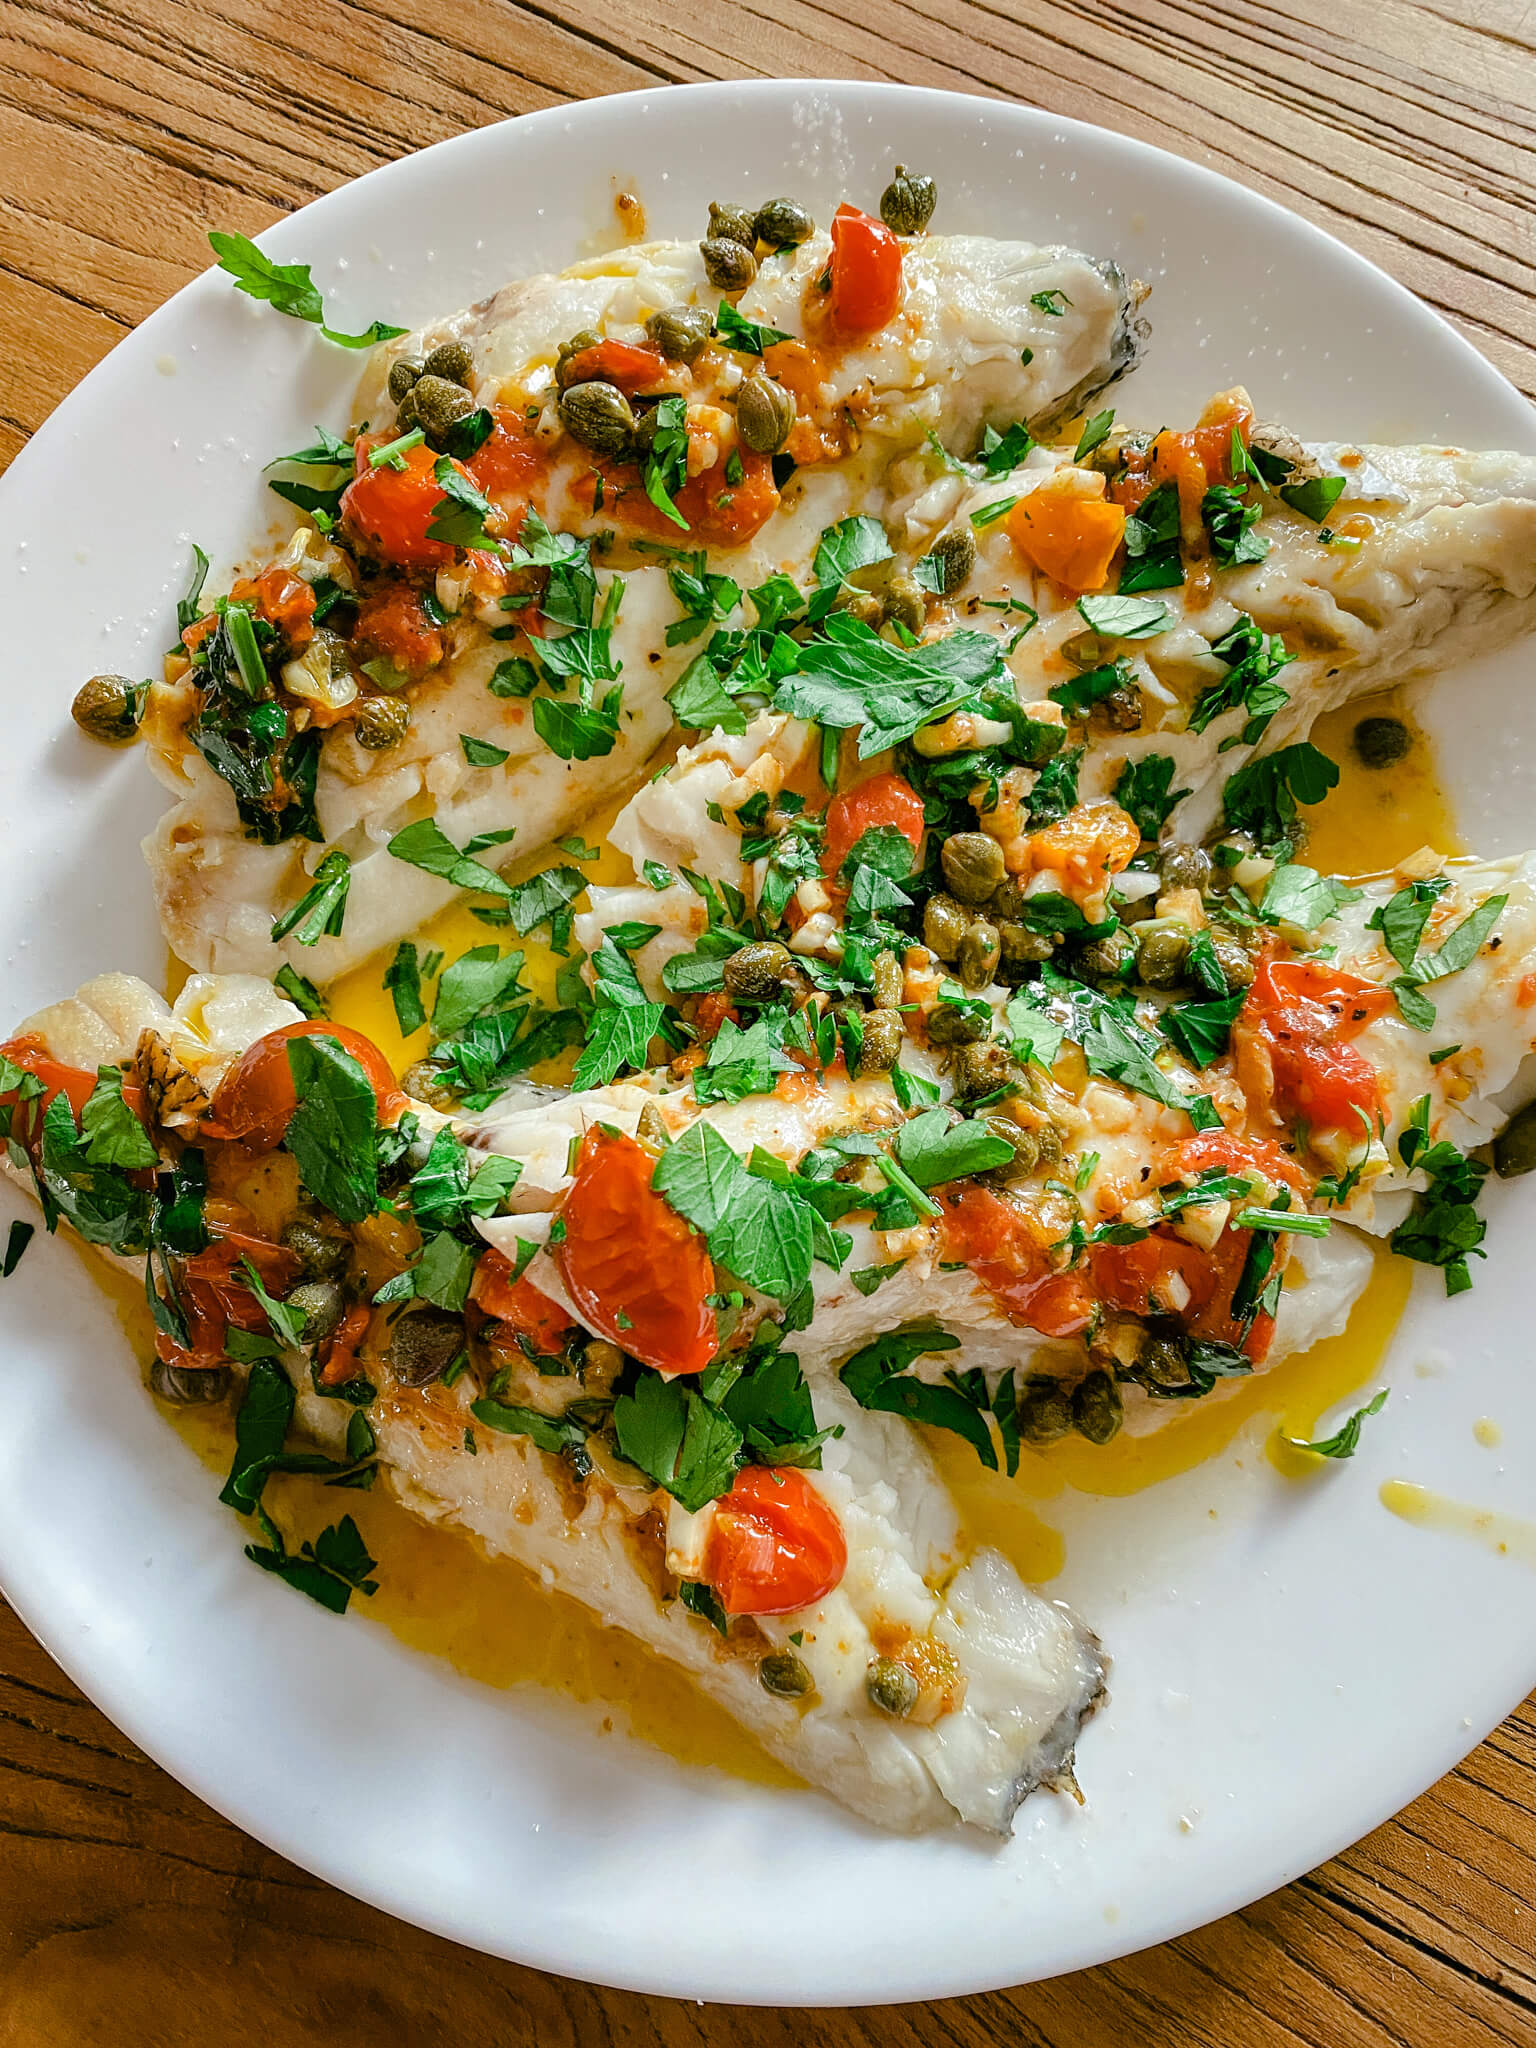 Sea Bass with Herbs, Tomatoes & Capers - Ancestral Nutrition